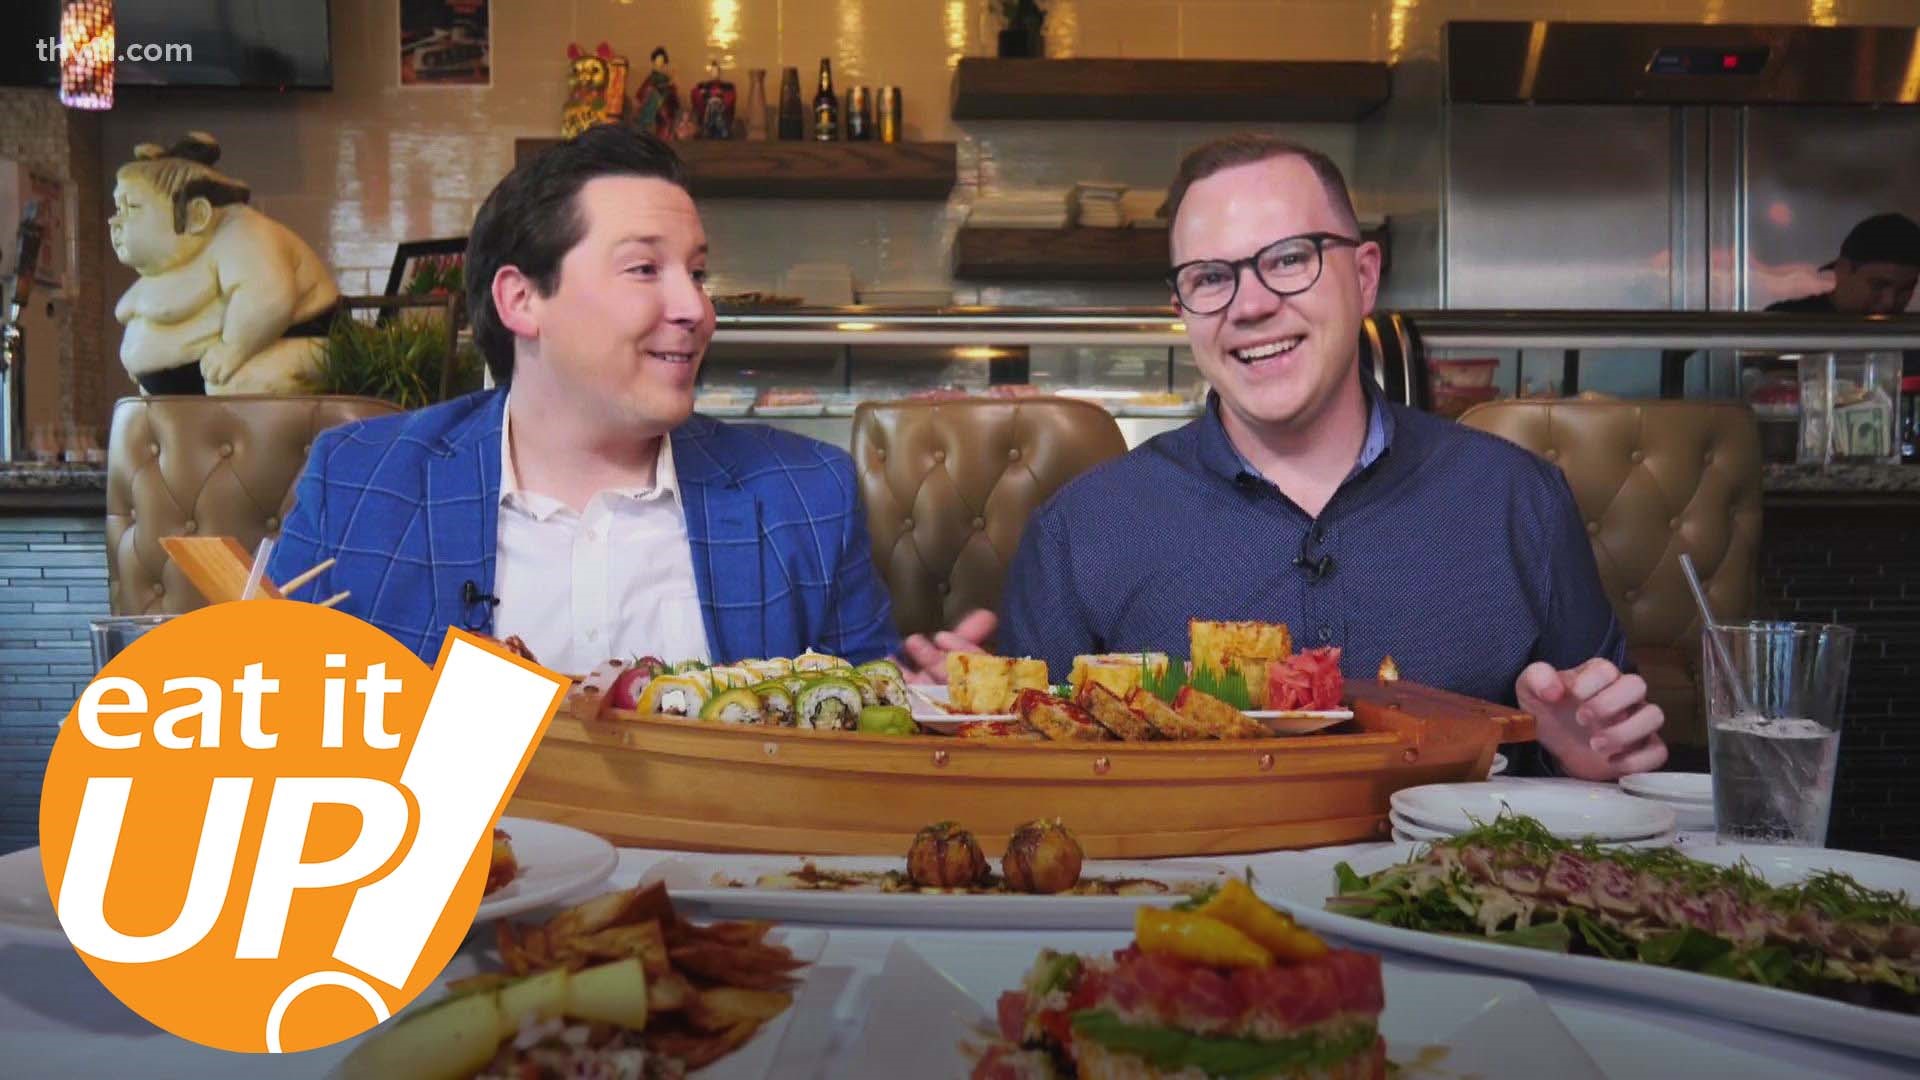 Skot and Hayden take us to Sushi Cafe West in Little Rock, which prides itself on bringing traditional sushi dishes to central Arkansas.